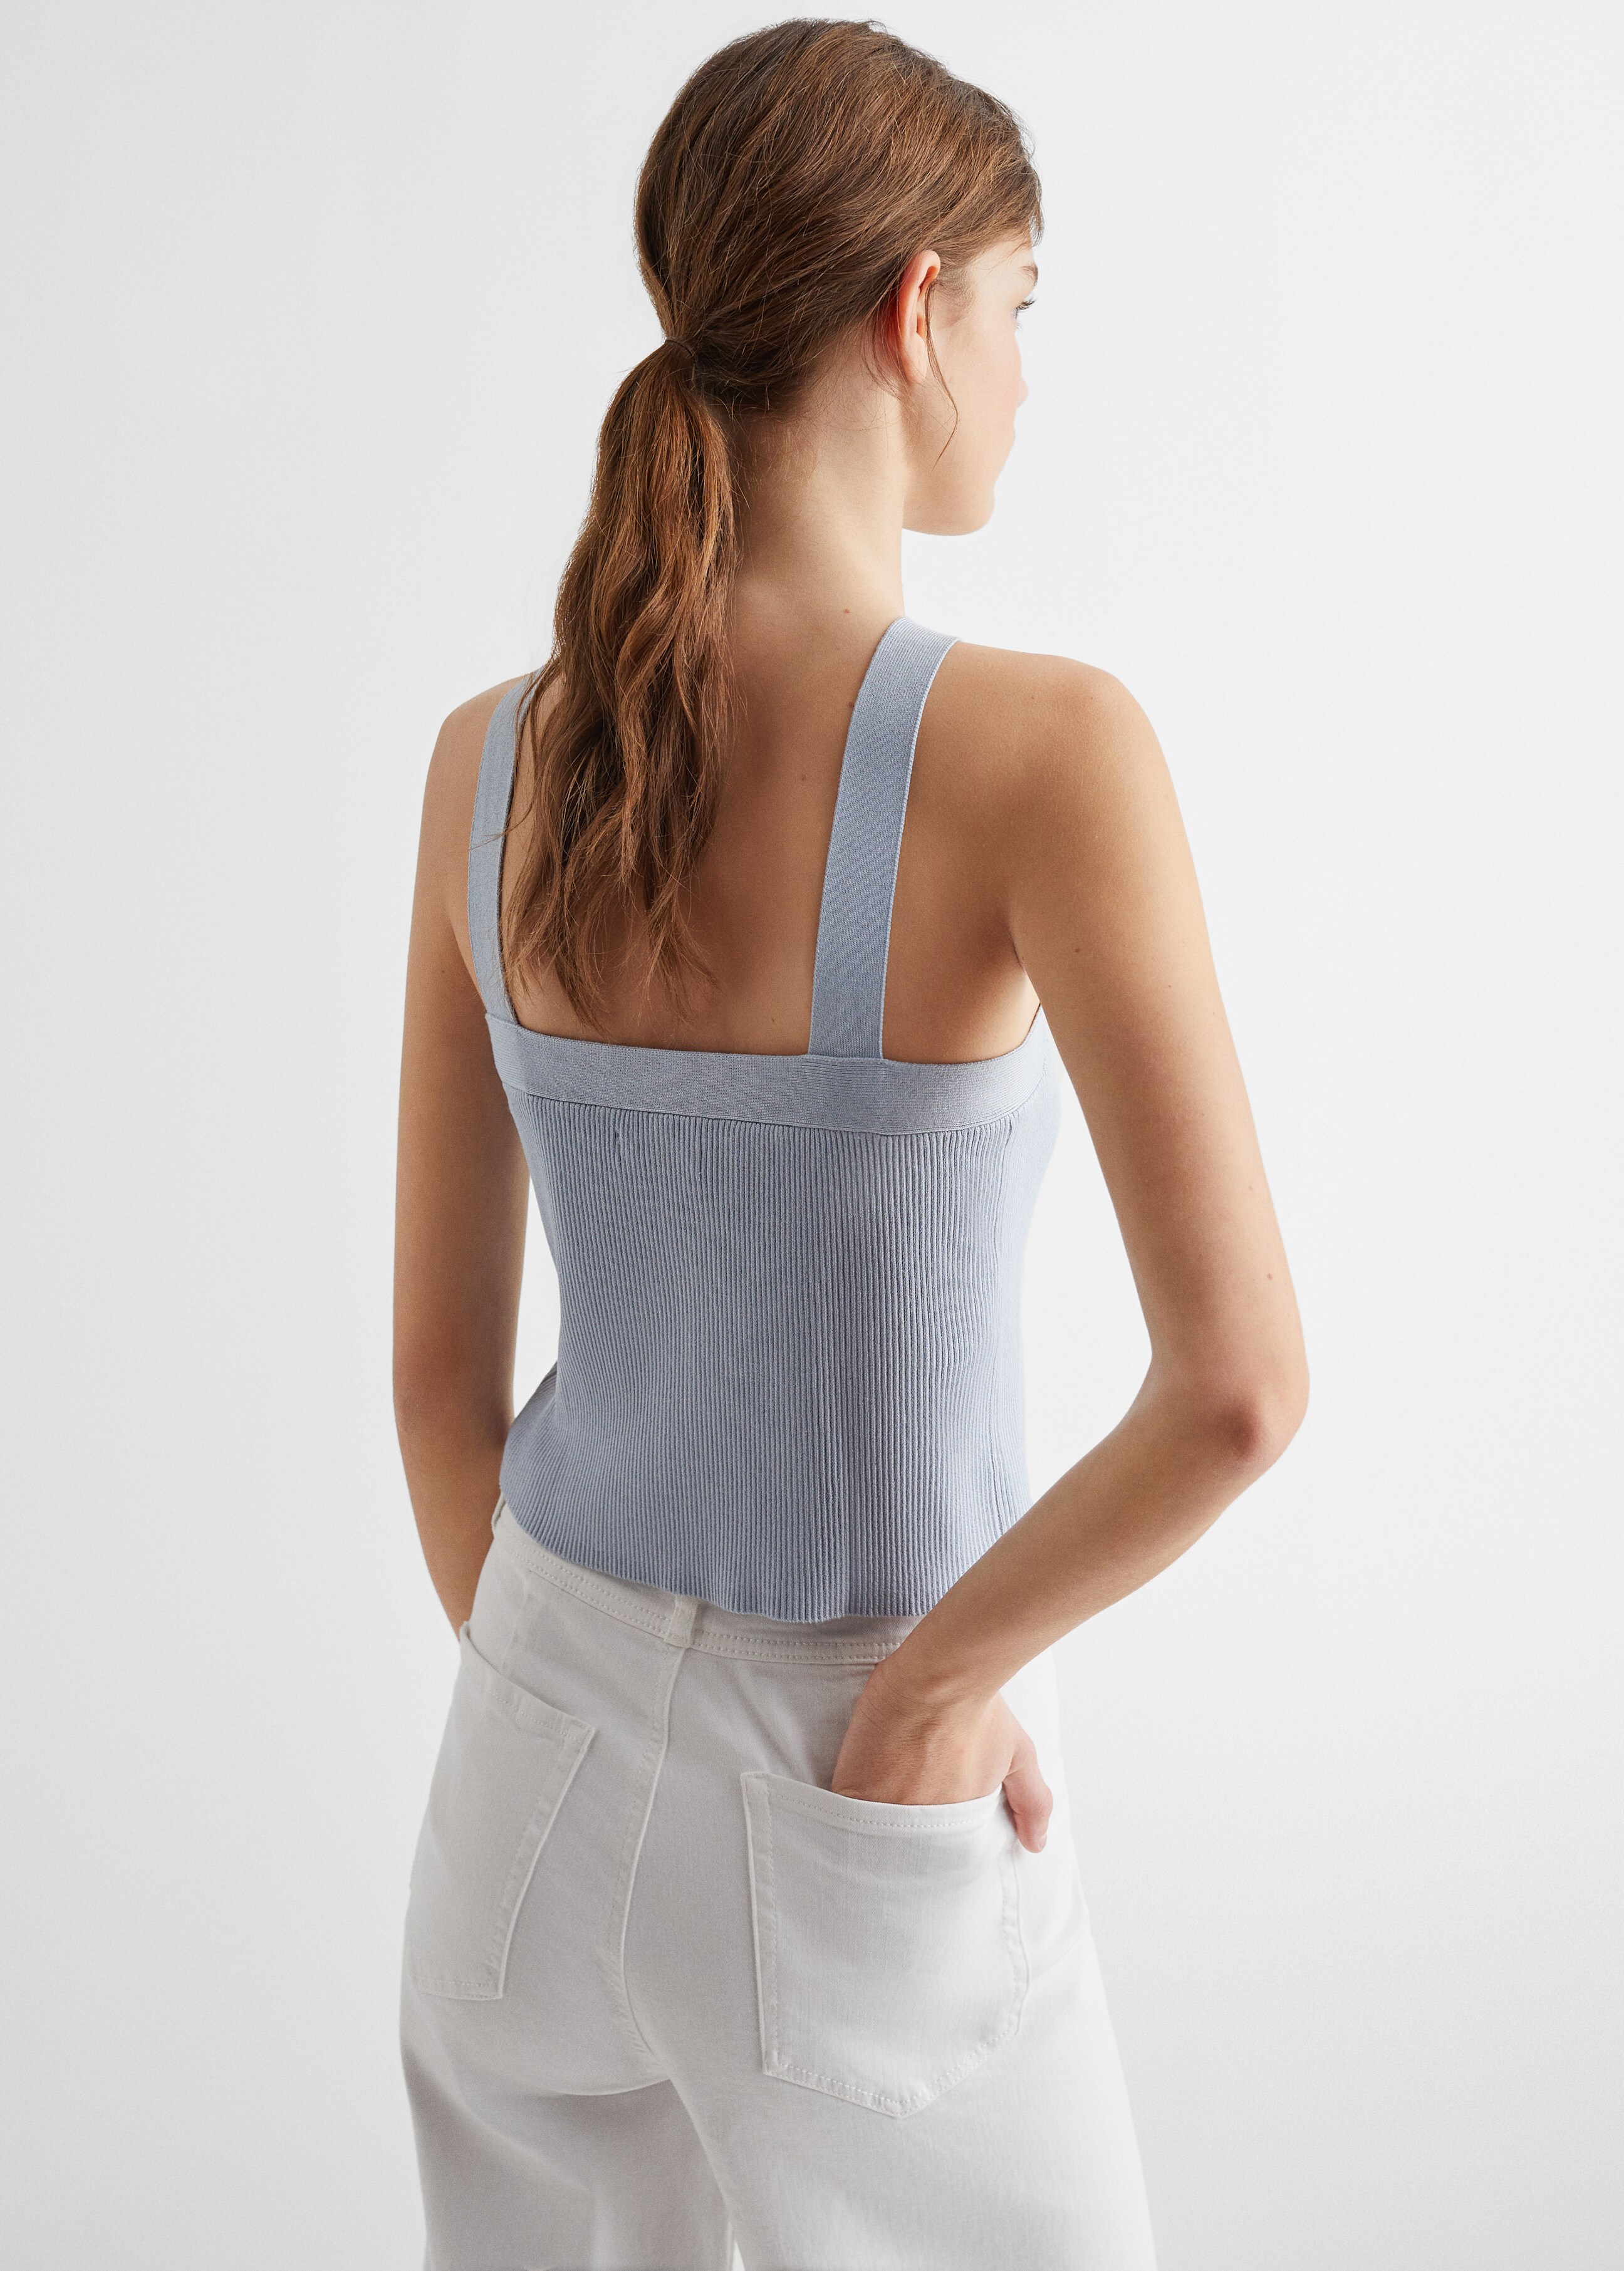 Wrap crop top - Reverse of the article